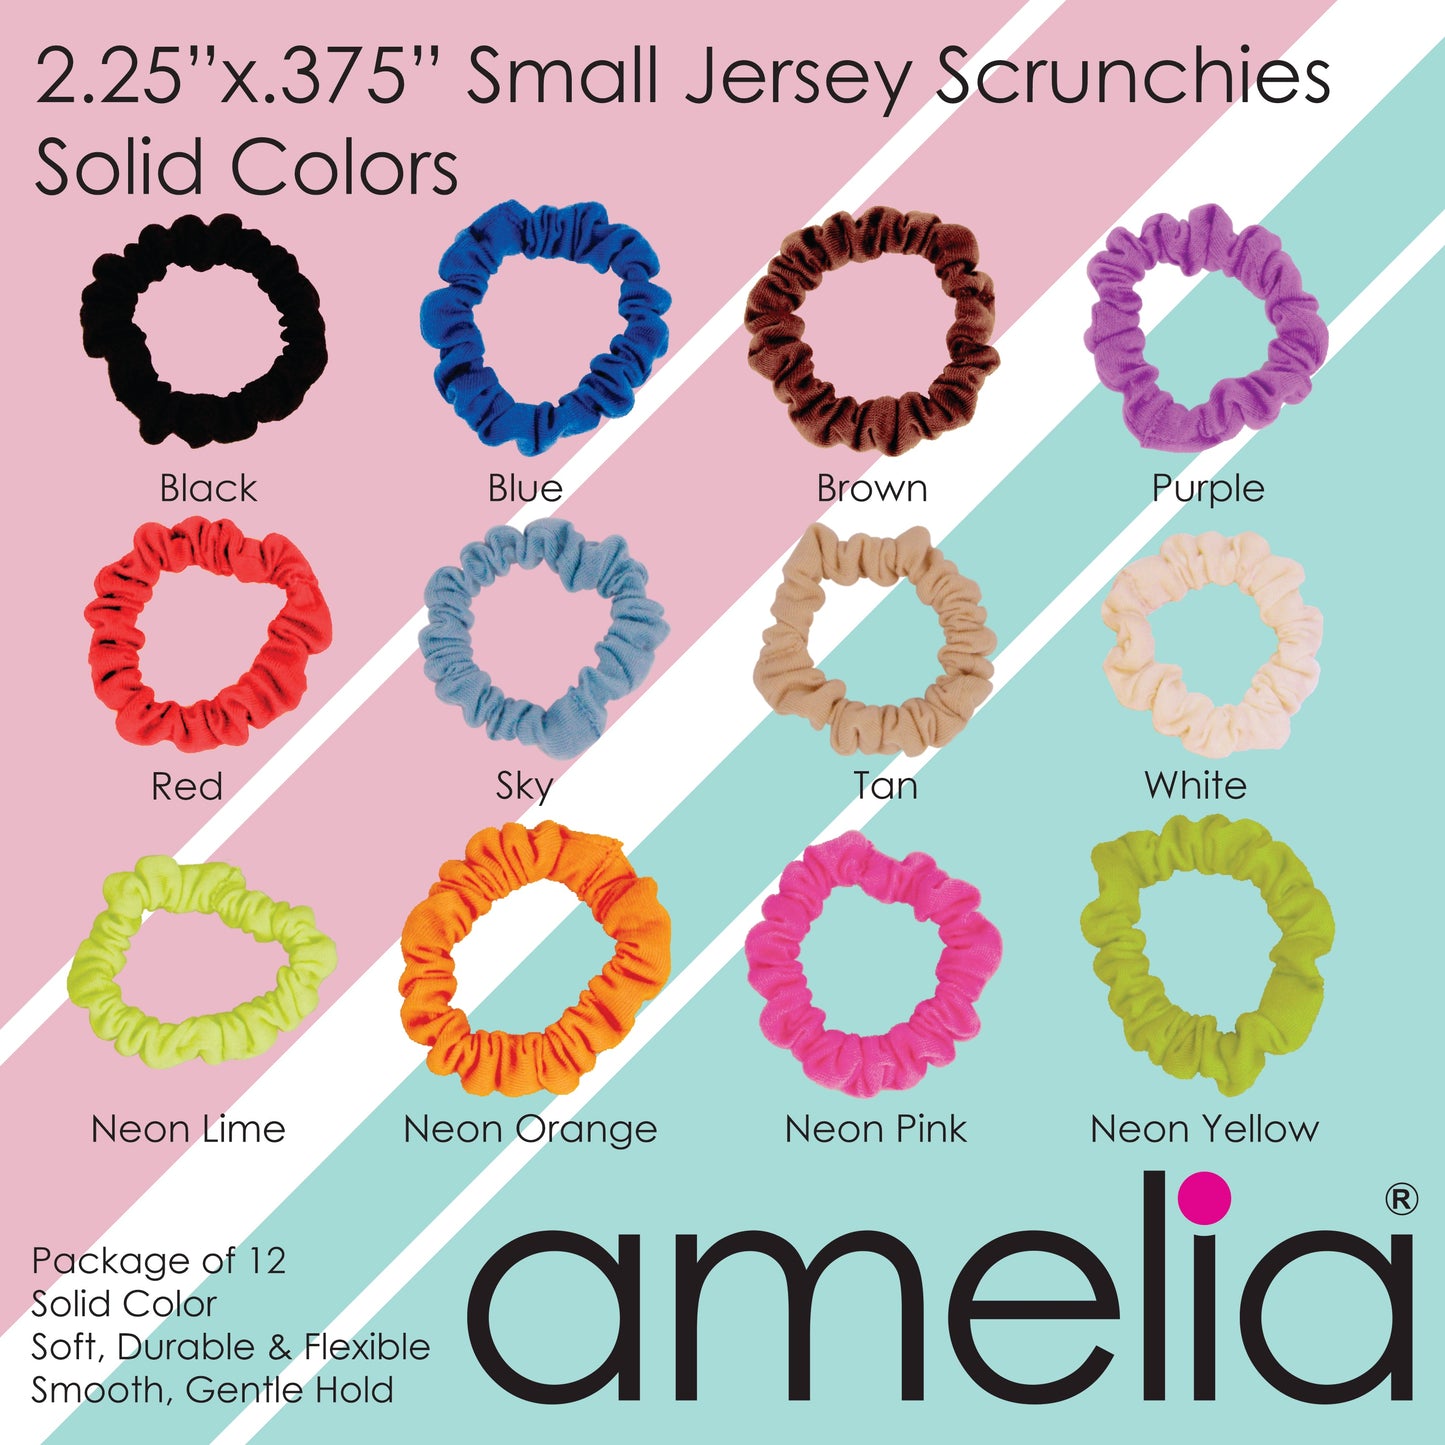 Amelia Beauty, Polka Dot Stripe Mix Jersey Scrunchies, 2.25in Diameter, Gentle on Hair, Strong Hold, No Snag, No Dents or Creases. 12 Pack